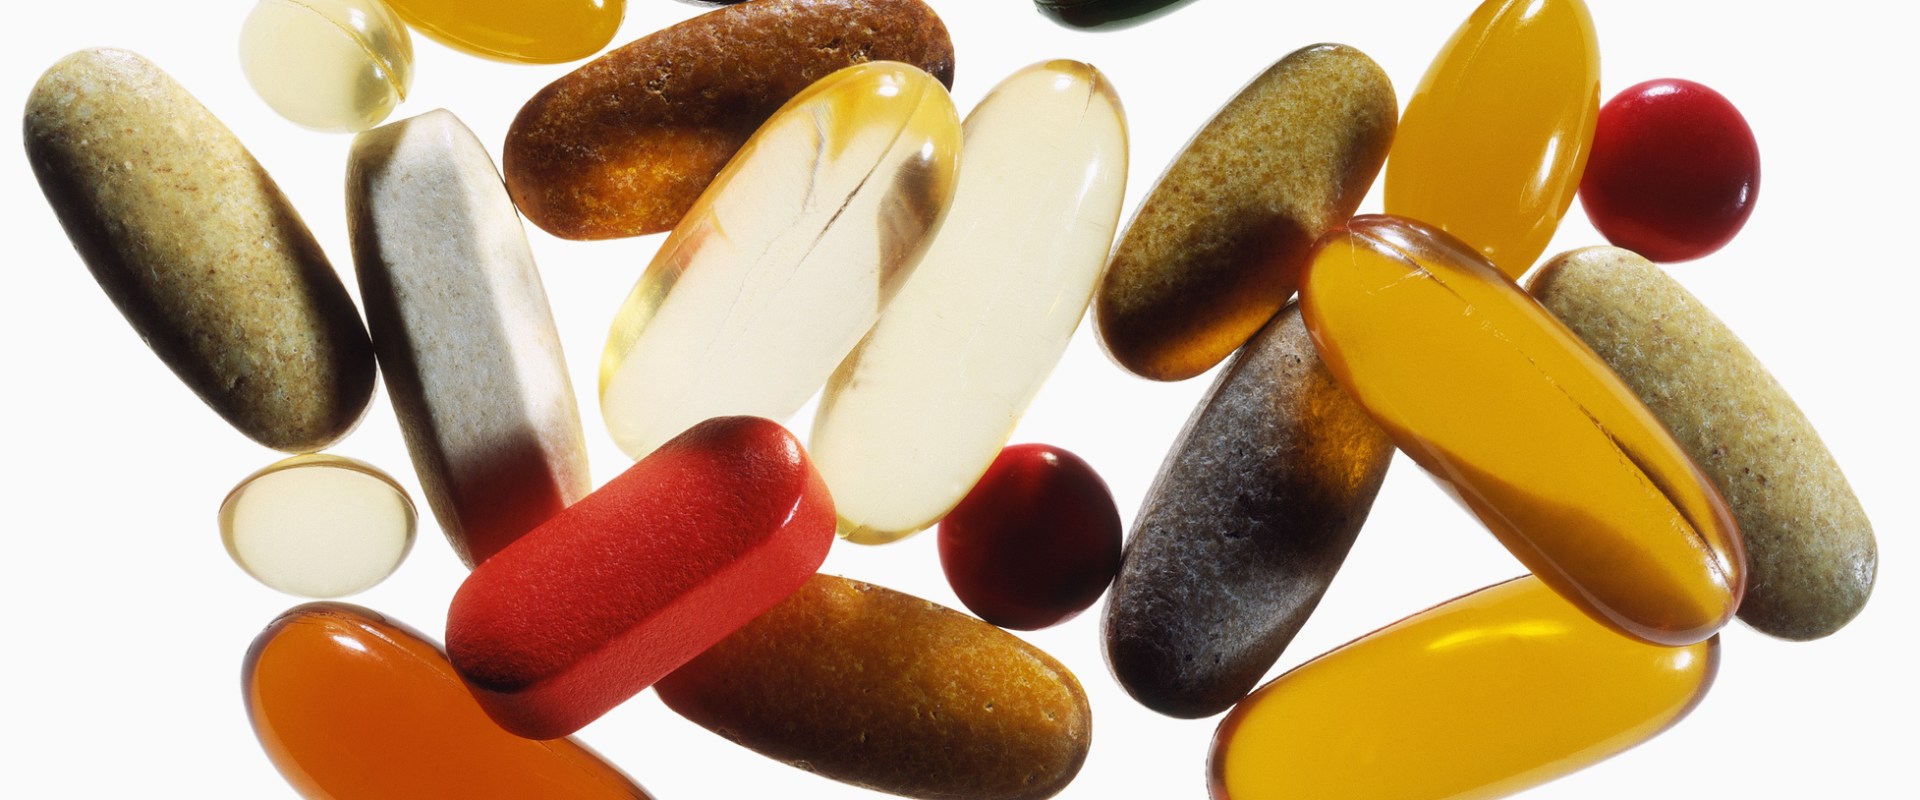 When to Take Vitamins and Supplements for Maximum Benefits